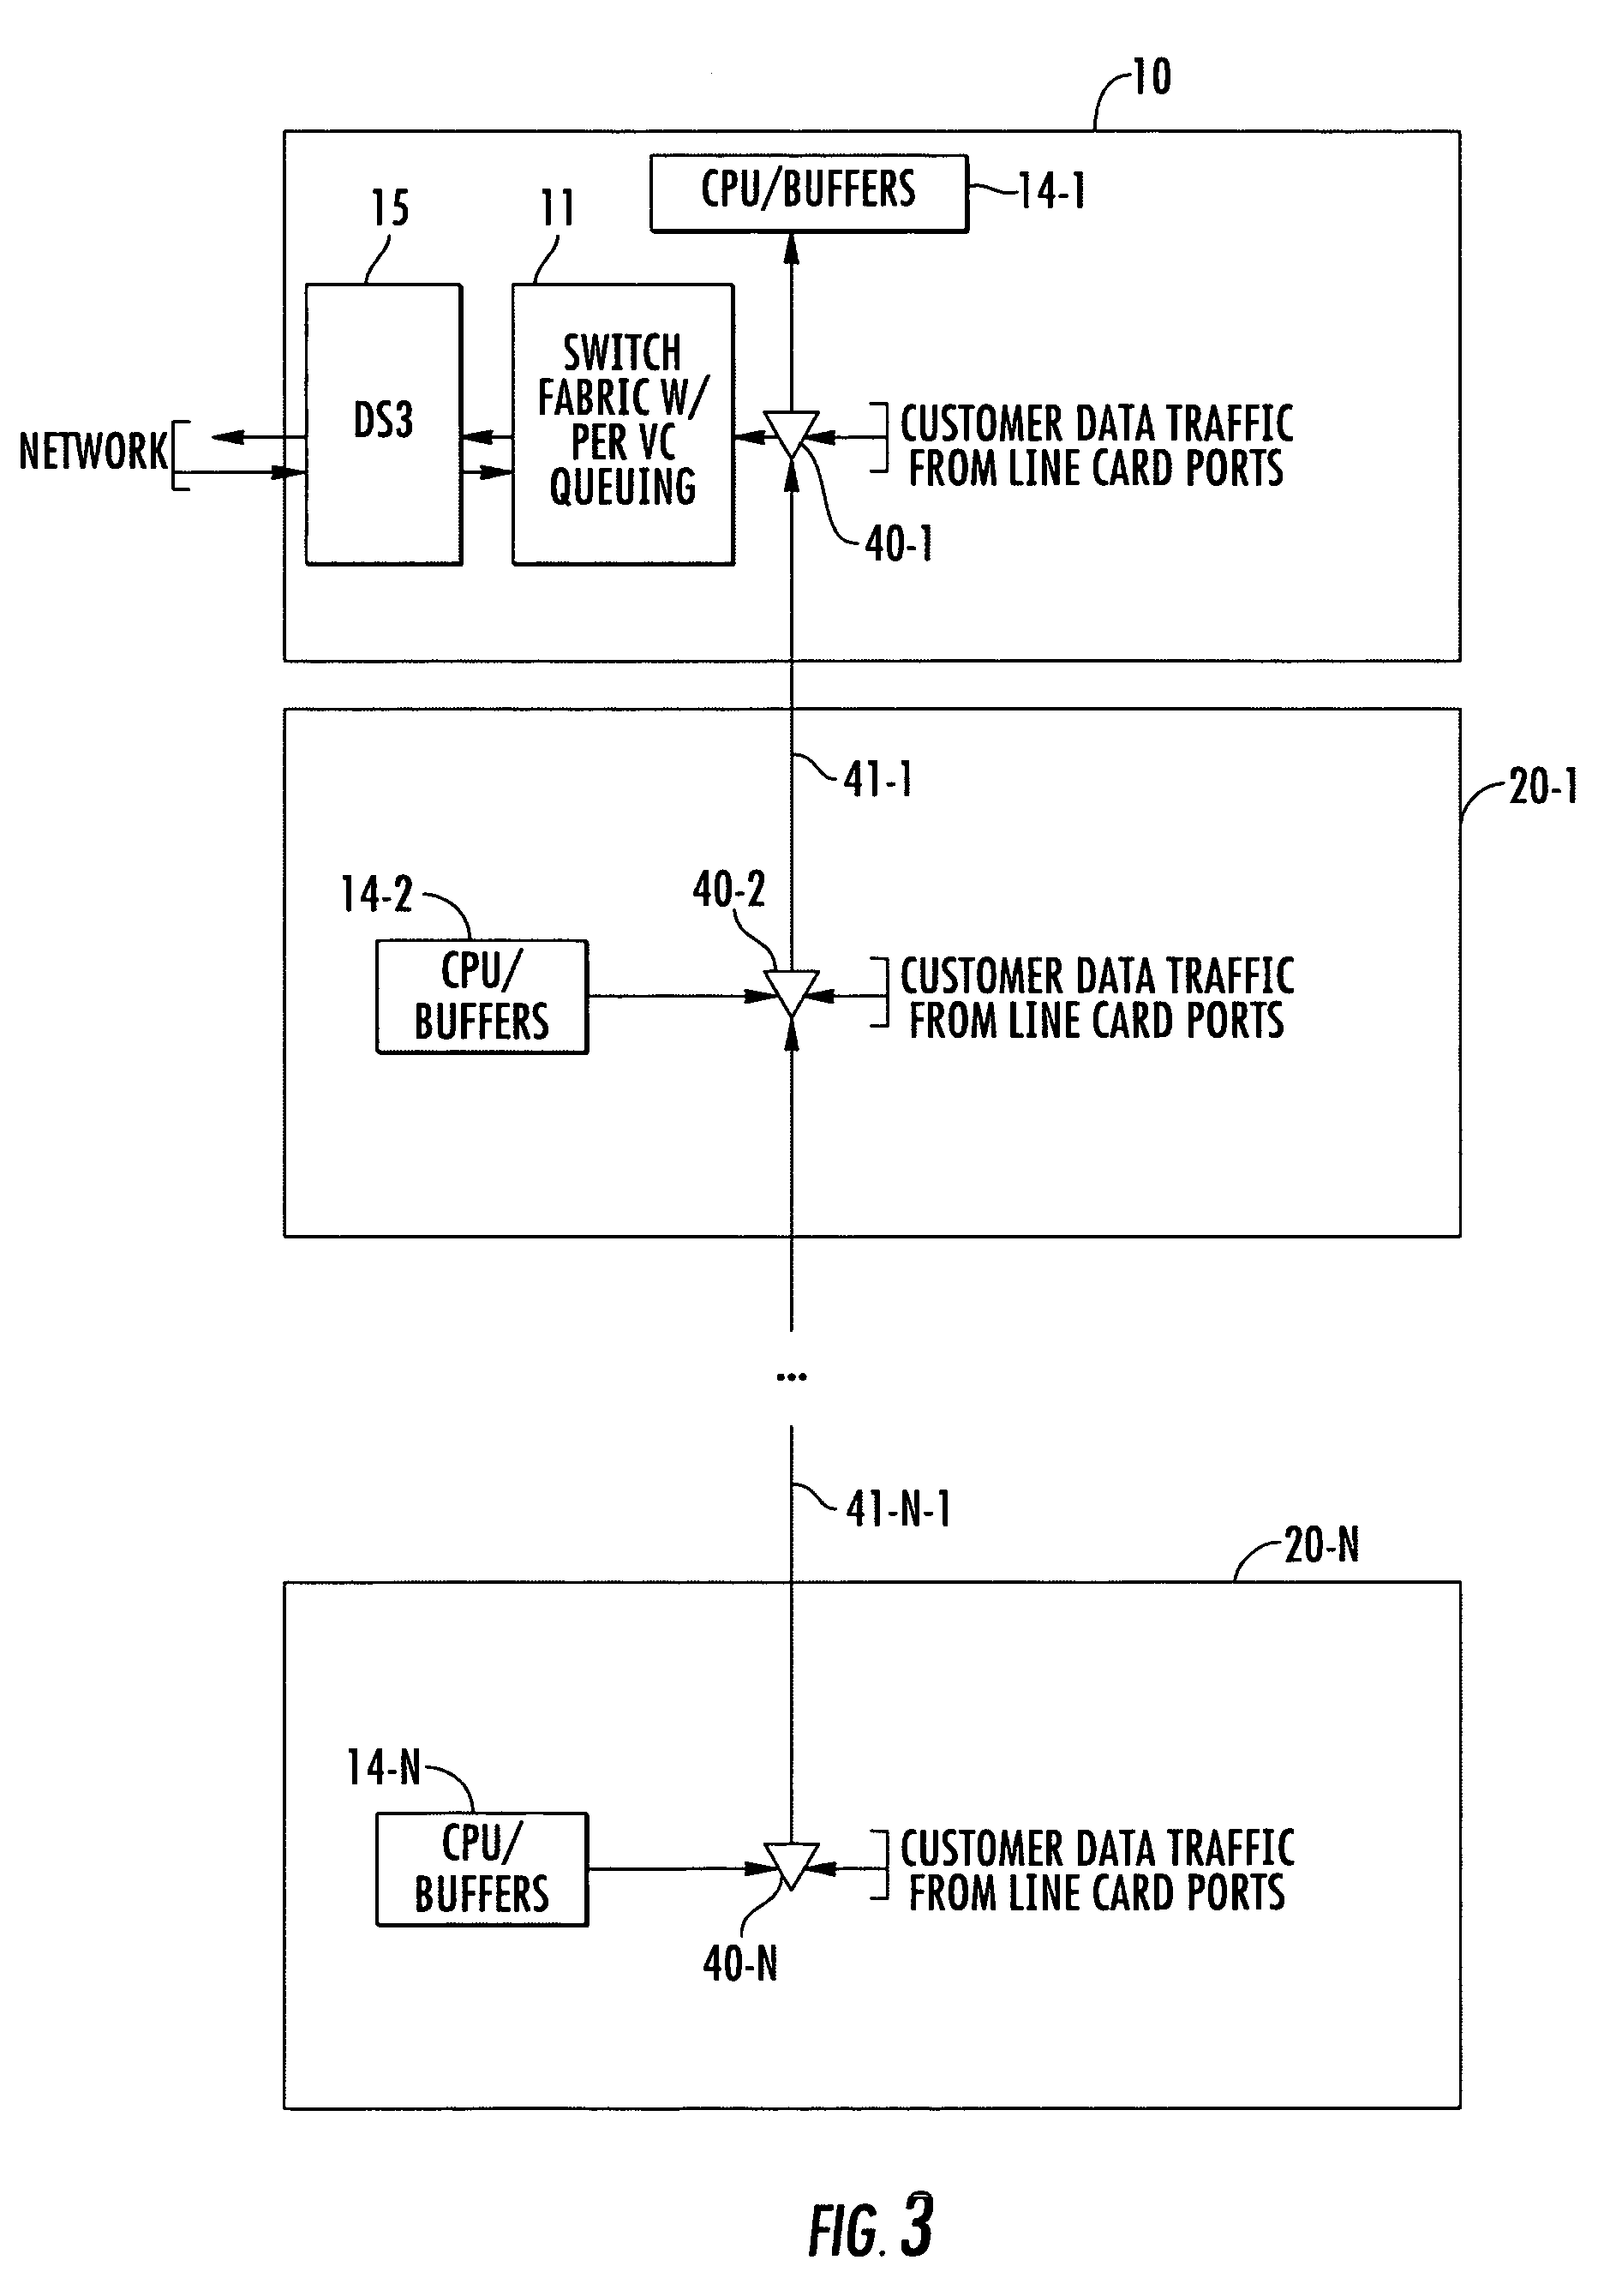 Method and system for preserving channel bank provisioning information when unit location changes within multi-shelf equipment rack